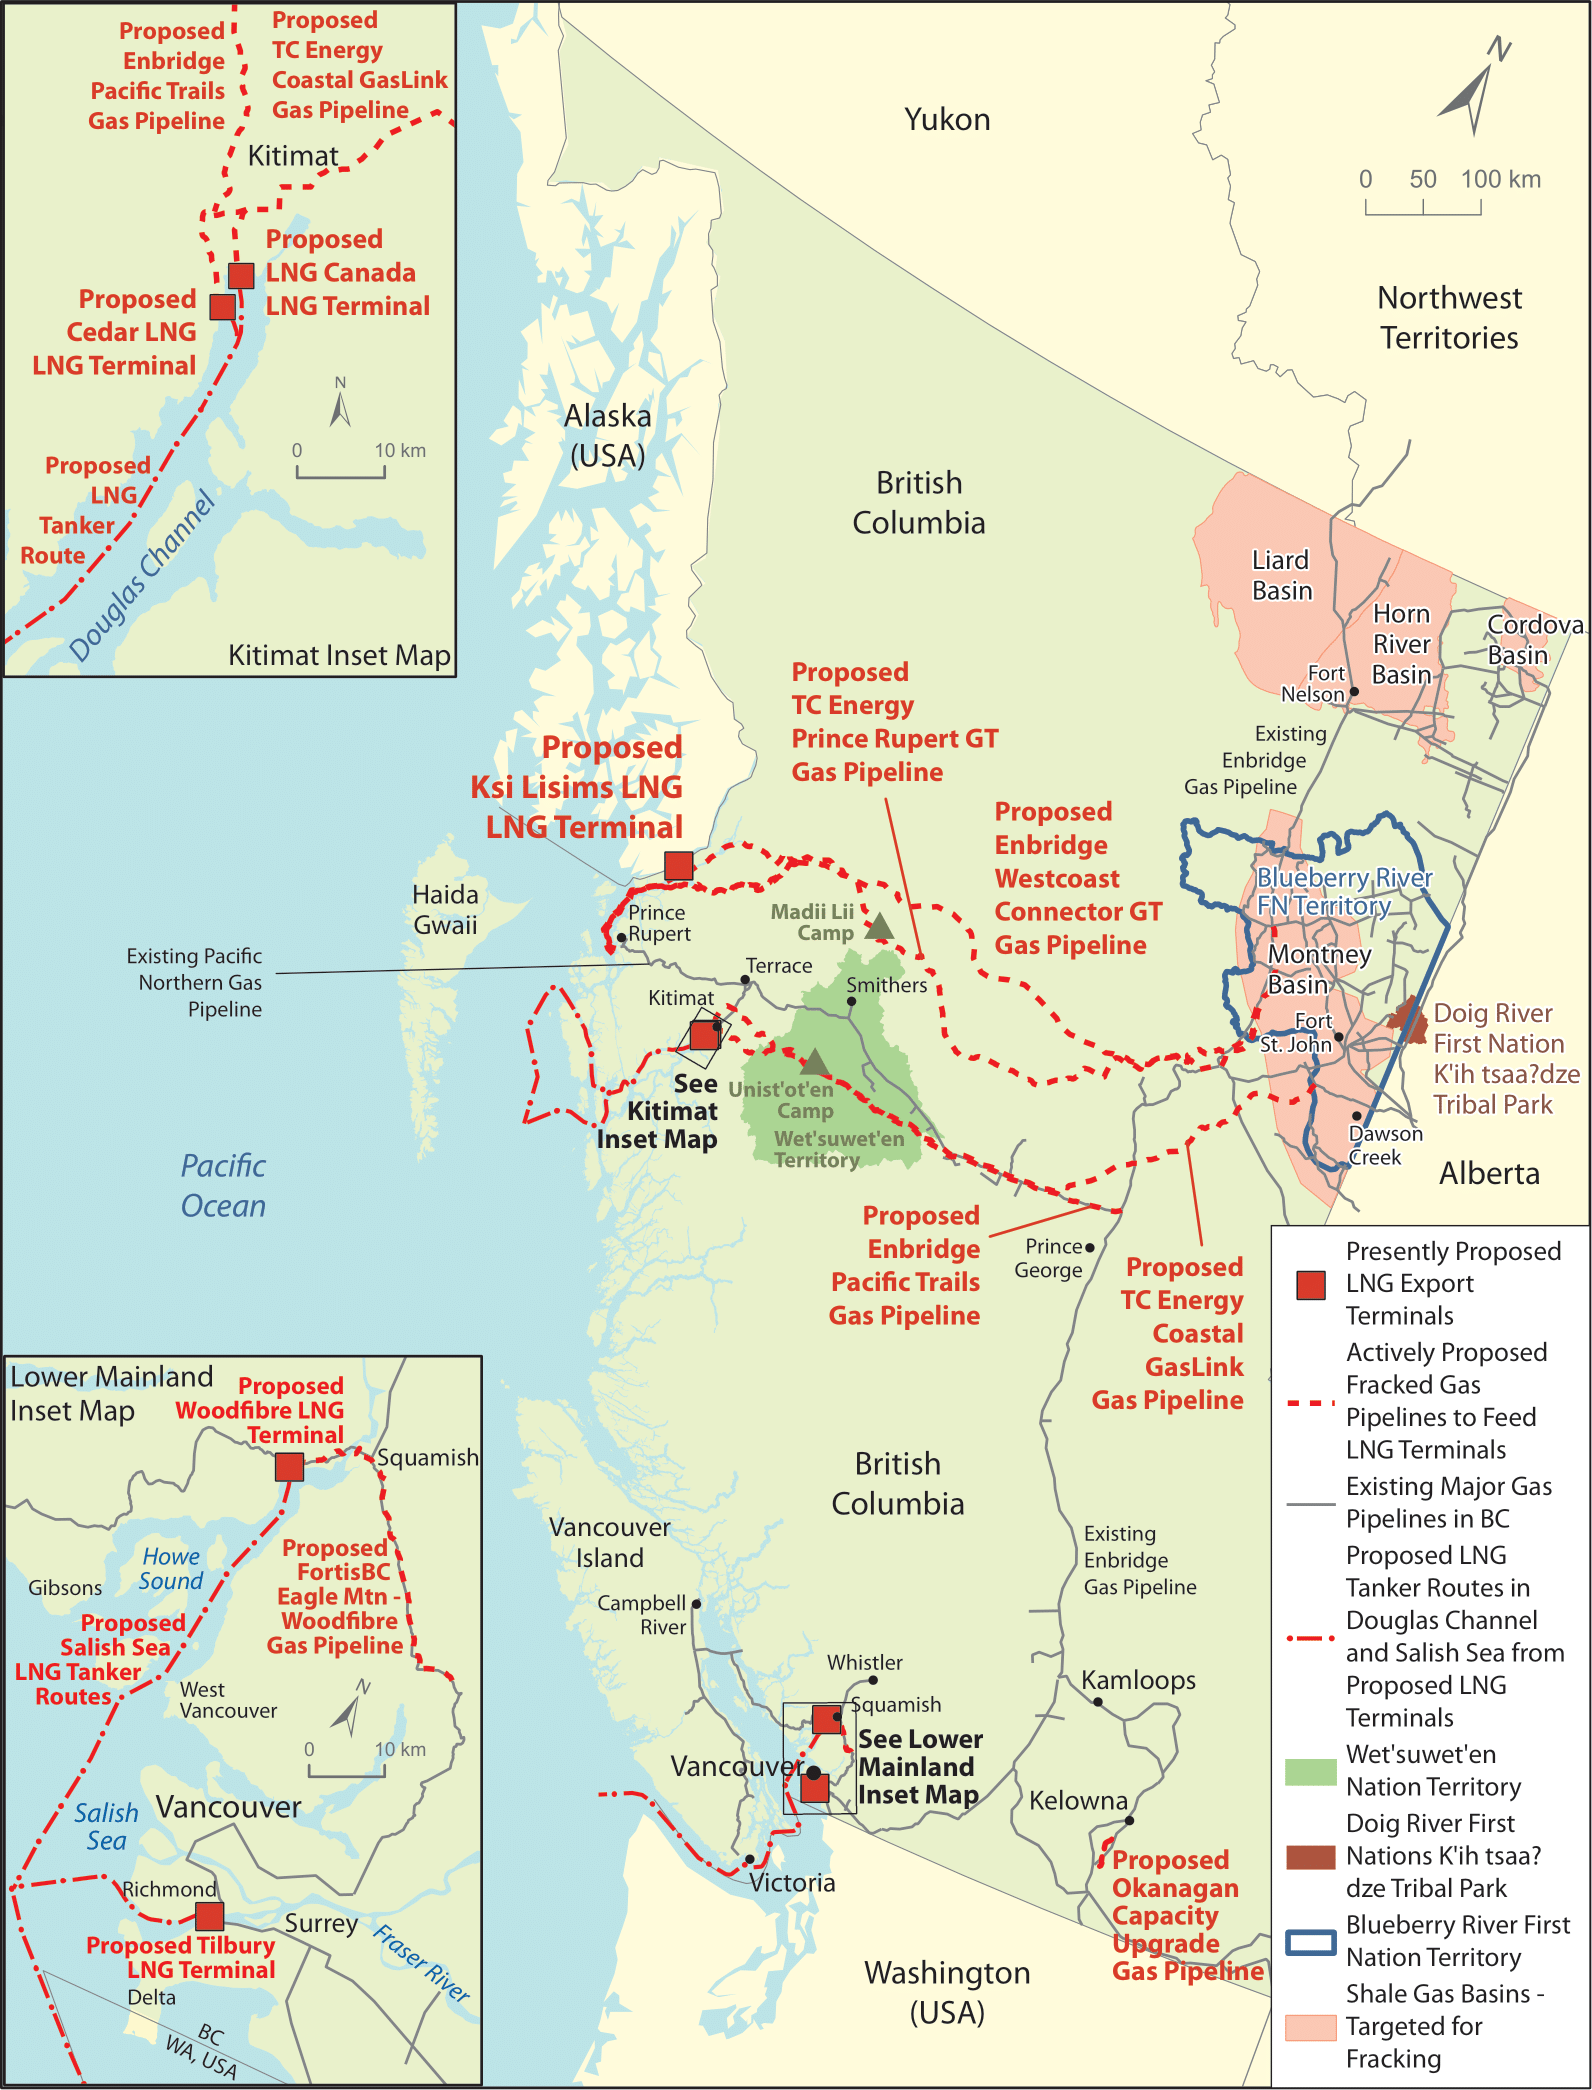 A map showing current and proposed LNG sites in BC. End of image description.